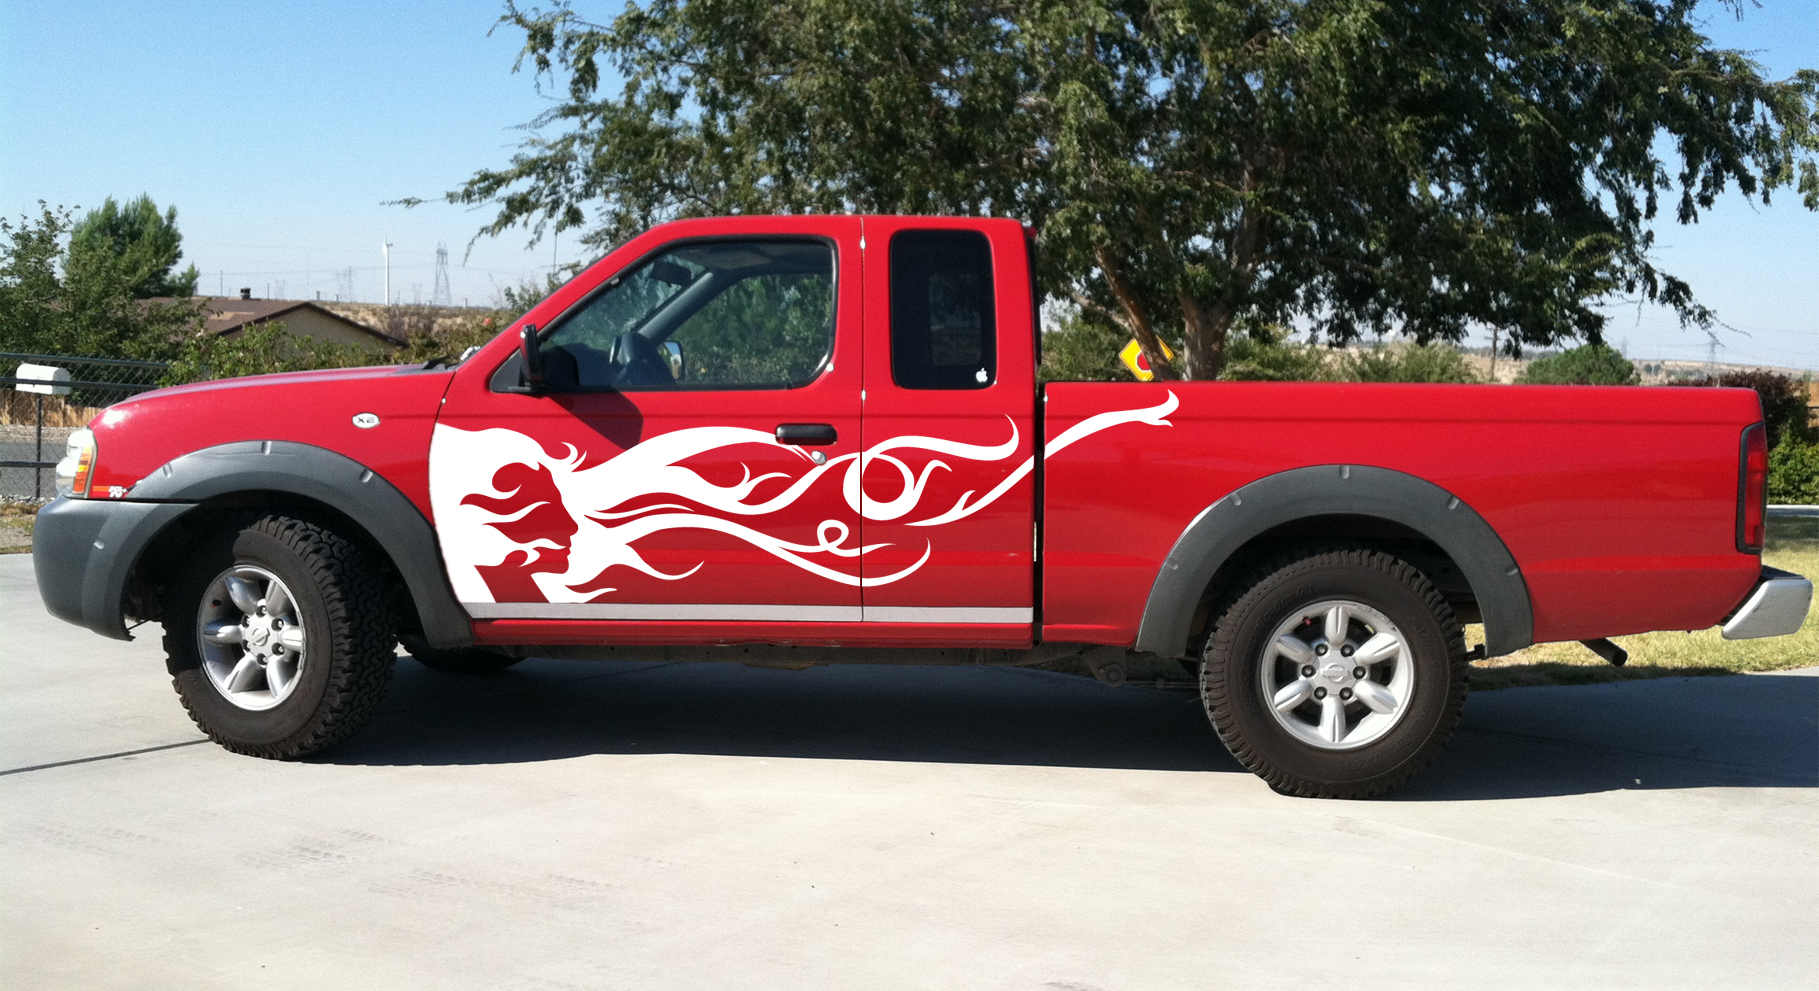 Custom decal art for cars Red Nissan Fronteir Truck beautiful White Decal art womans face and hair